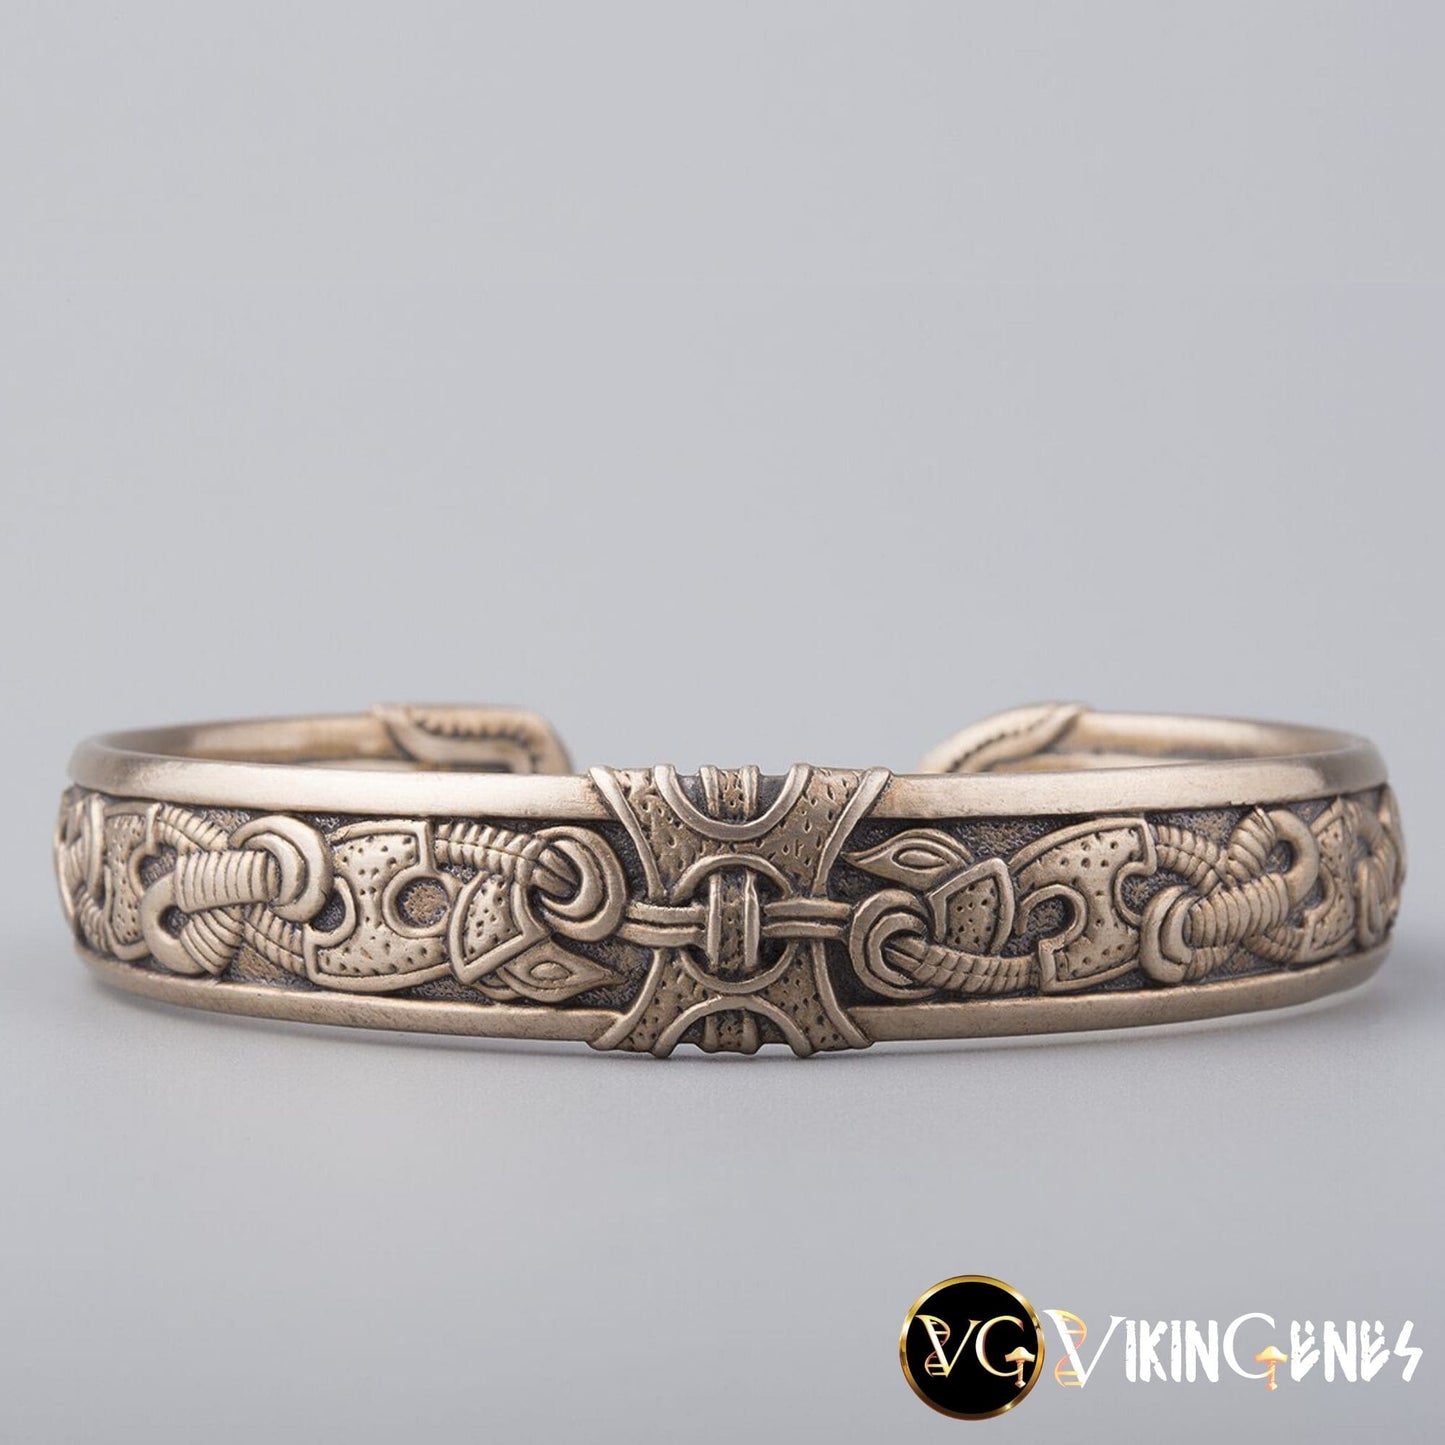 Jelling Style Bronze Arm Ring